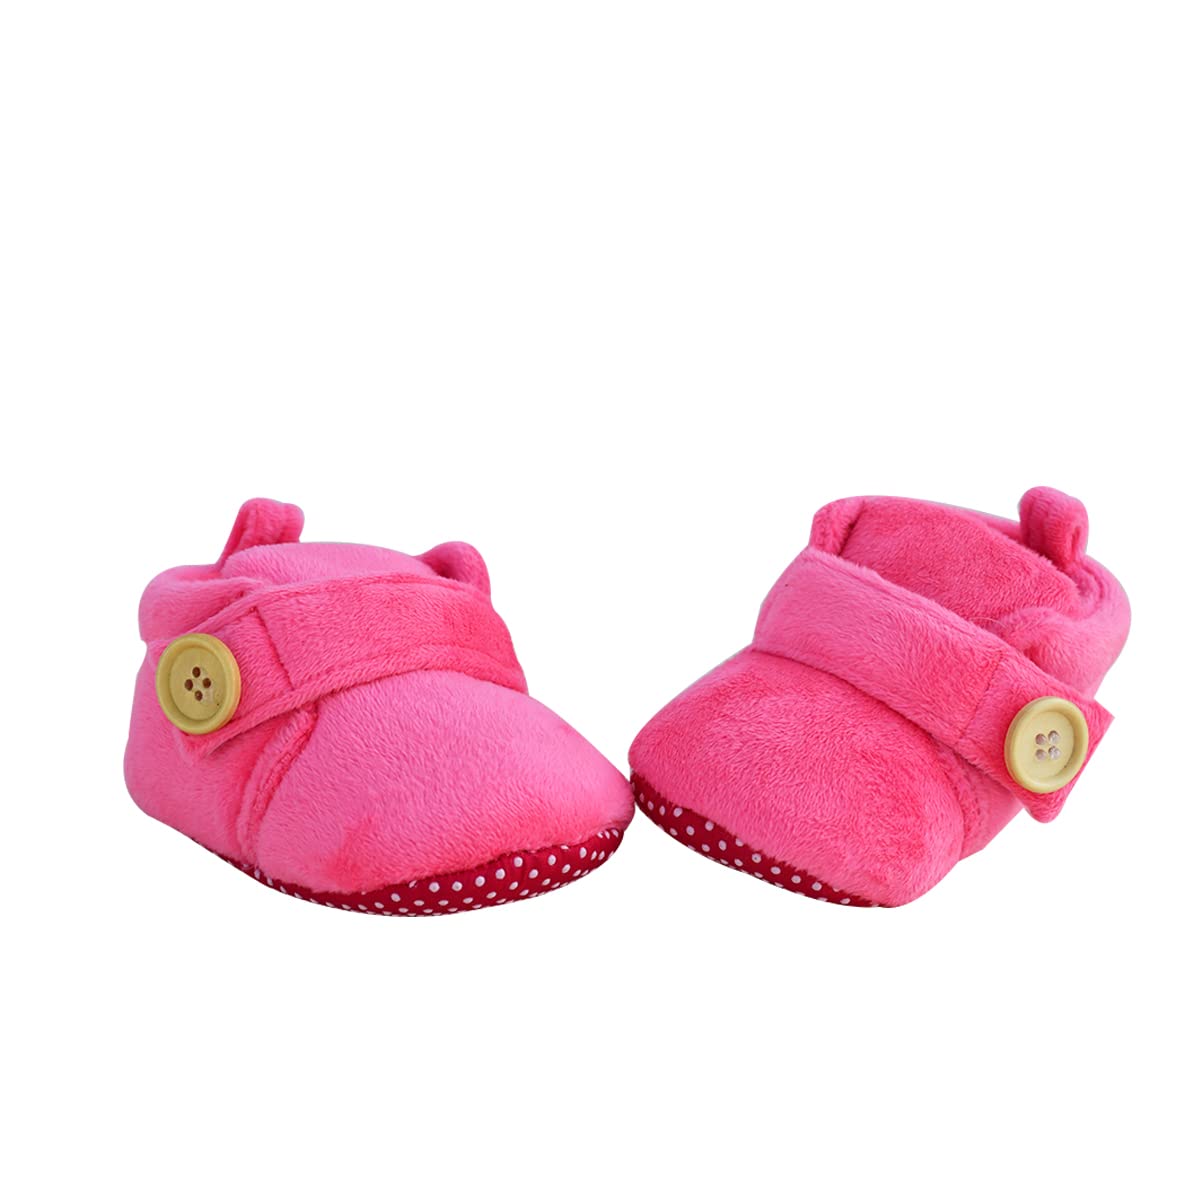 Unisex Soft Anti Slip Baby Shoes | Up to 50% off